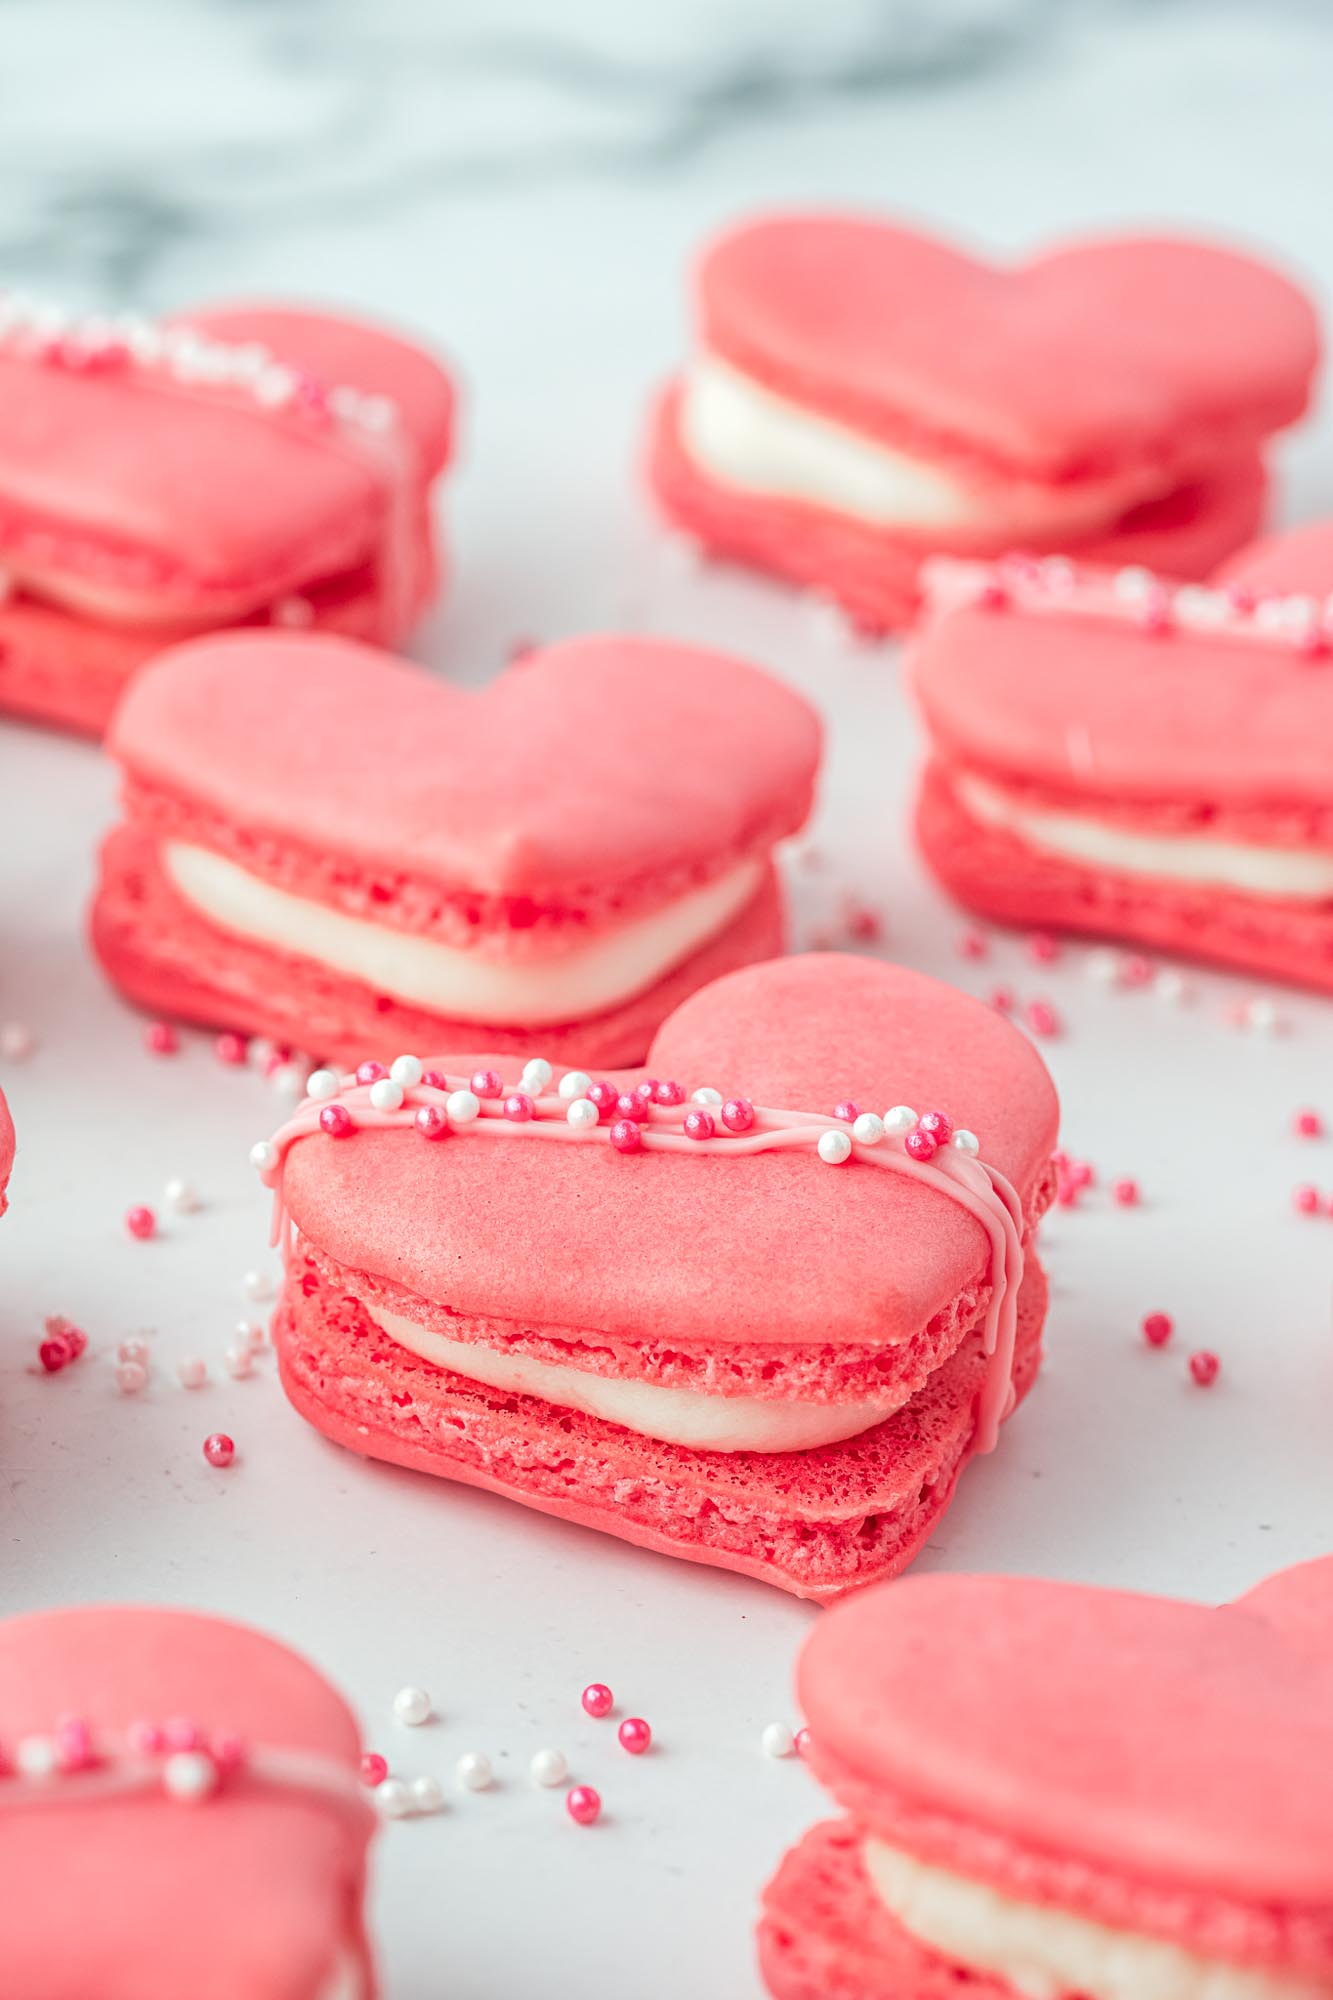 Heart macarons, a shot with an angle to show the filling.